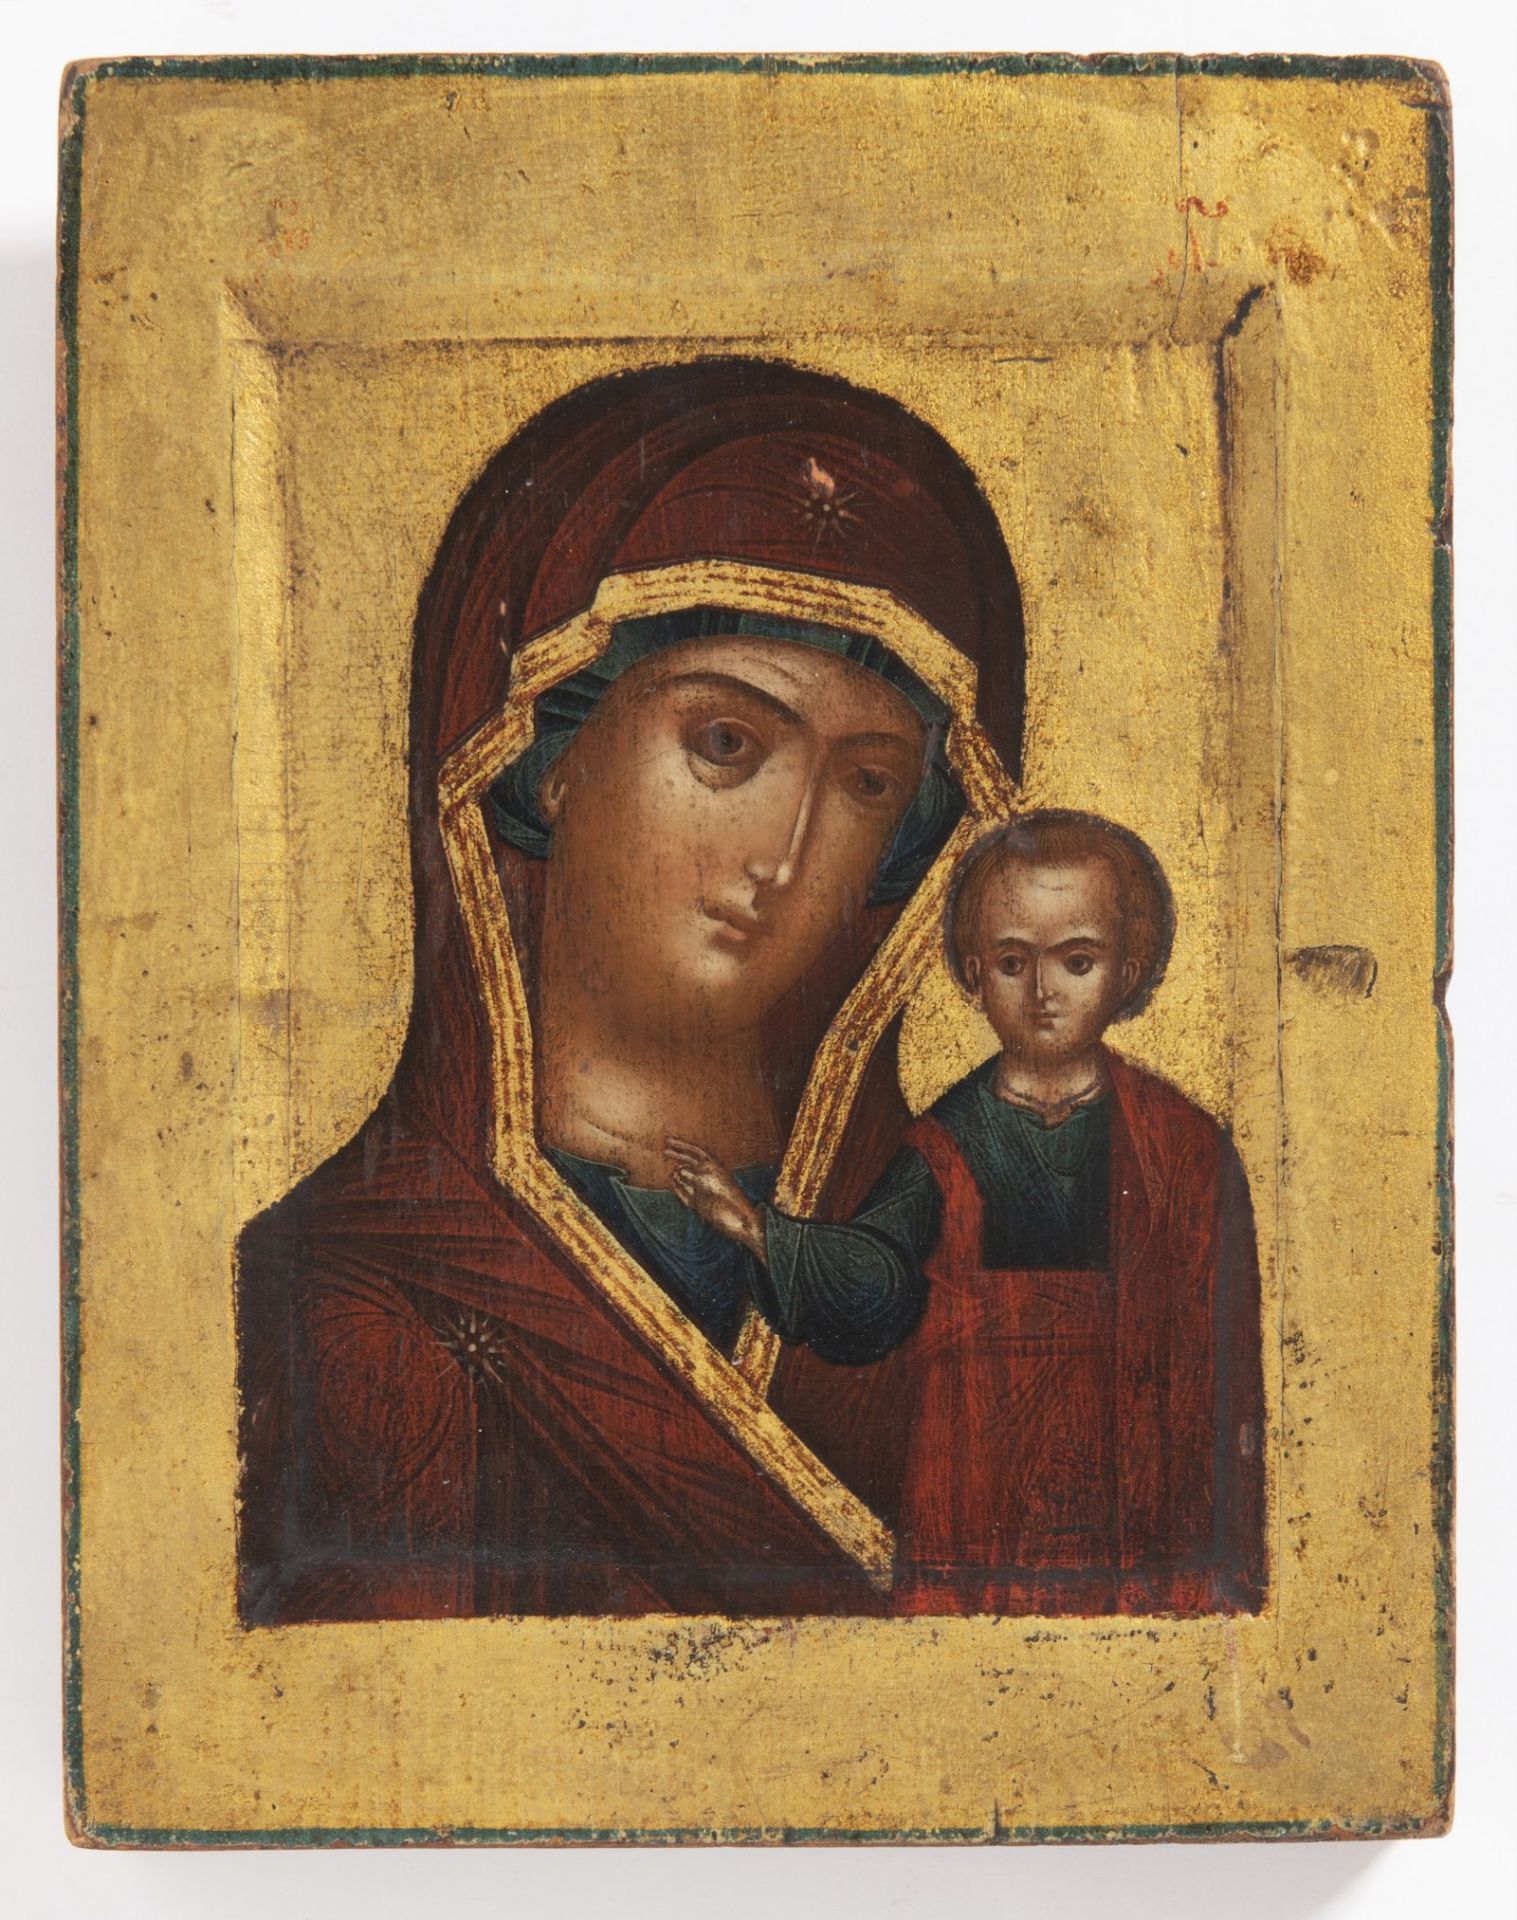 ICON OF MARY THE HOLIEST 18th century Oil, wood, gilding 23 x 18,5 cm Mary with Jesus in the